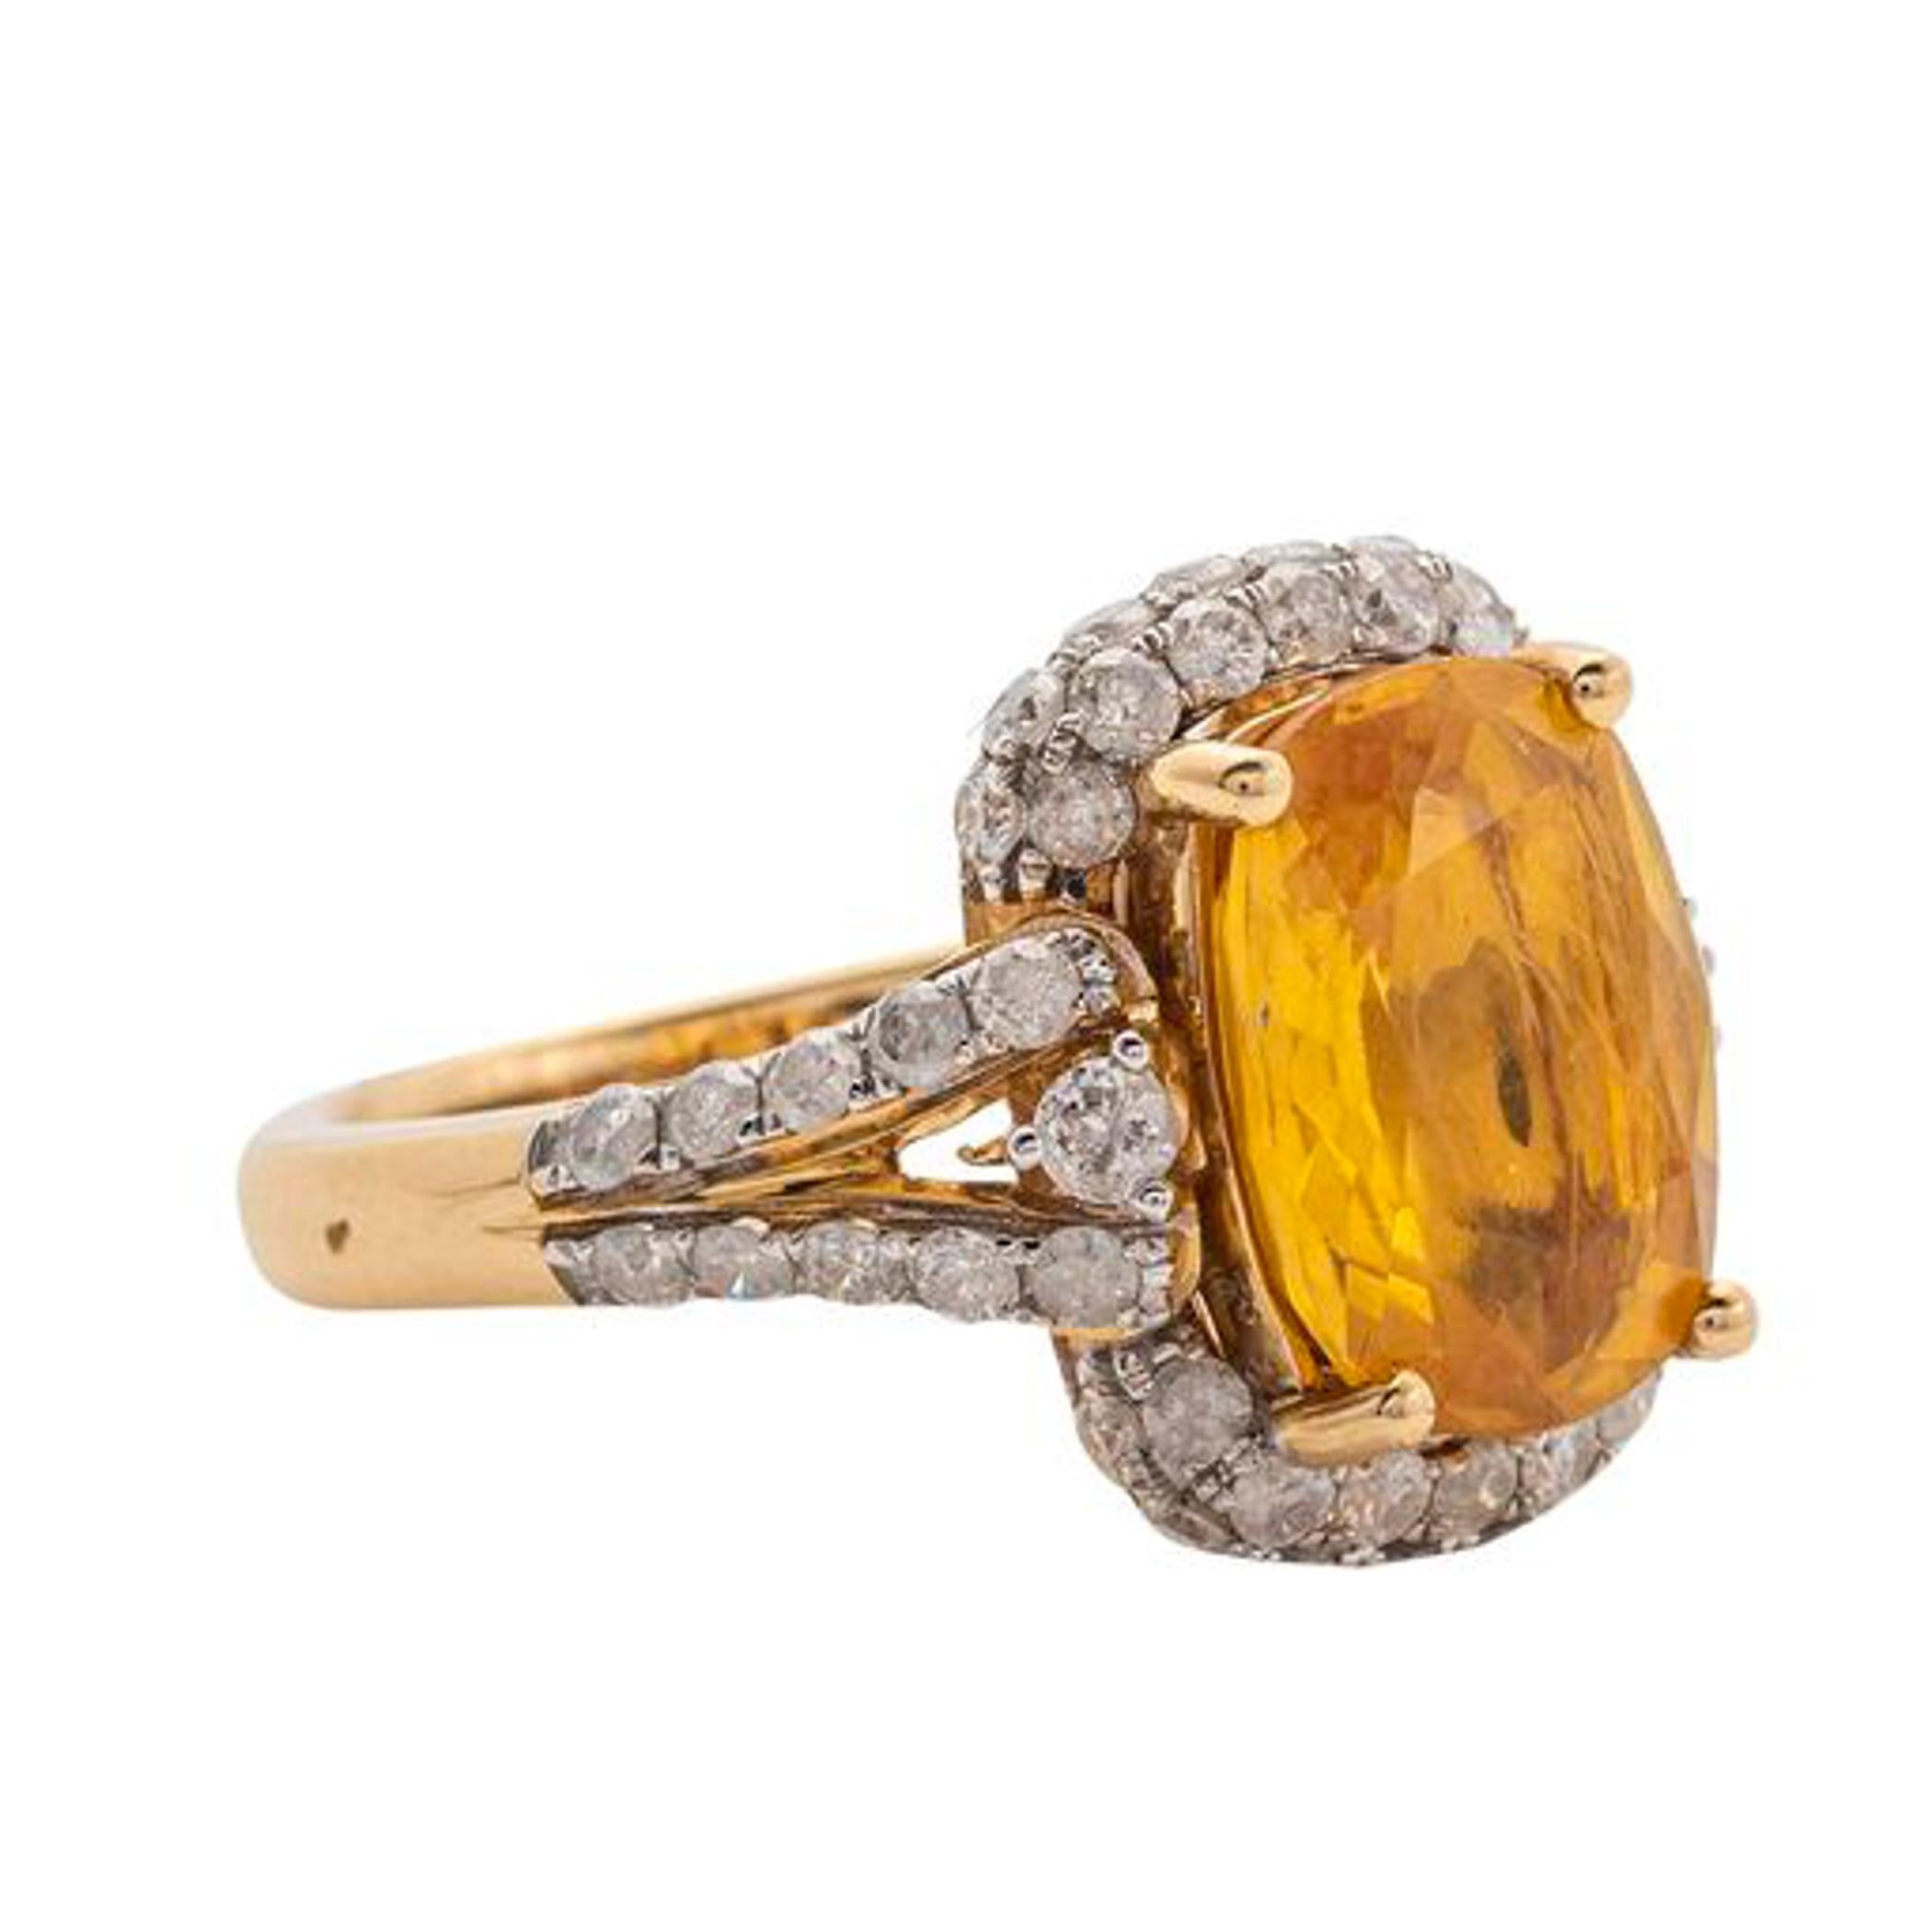 Yellow Sapphire and Diamond Ring 
Yellow Sapphire weighing approximately 5.59 cts 
Diamonds weighing approximately 1.21 cts 
7.50 grams (gross), size 7 

Accompanied with AIG paperwork stating: 
14K yellow gold ladies Yellow Sapphire and Diamond